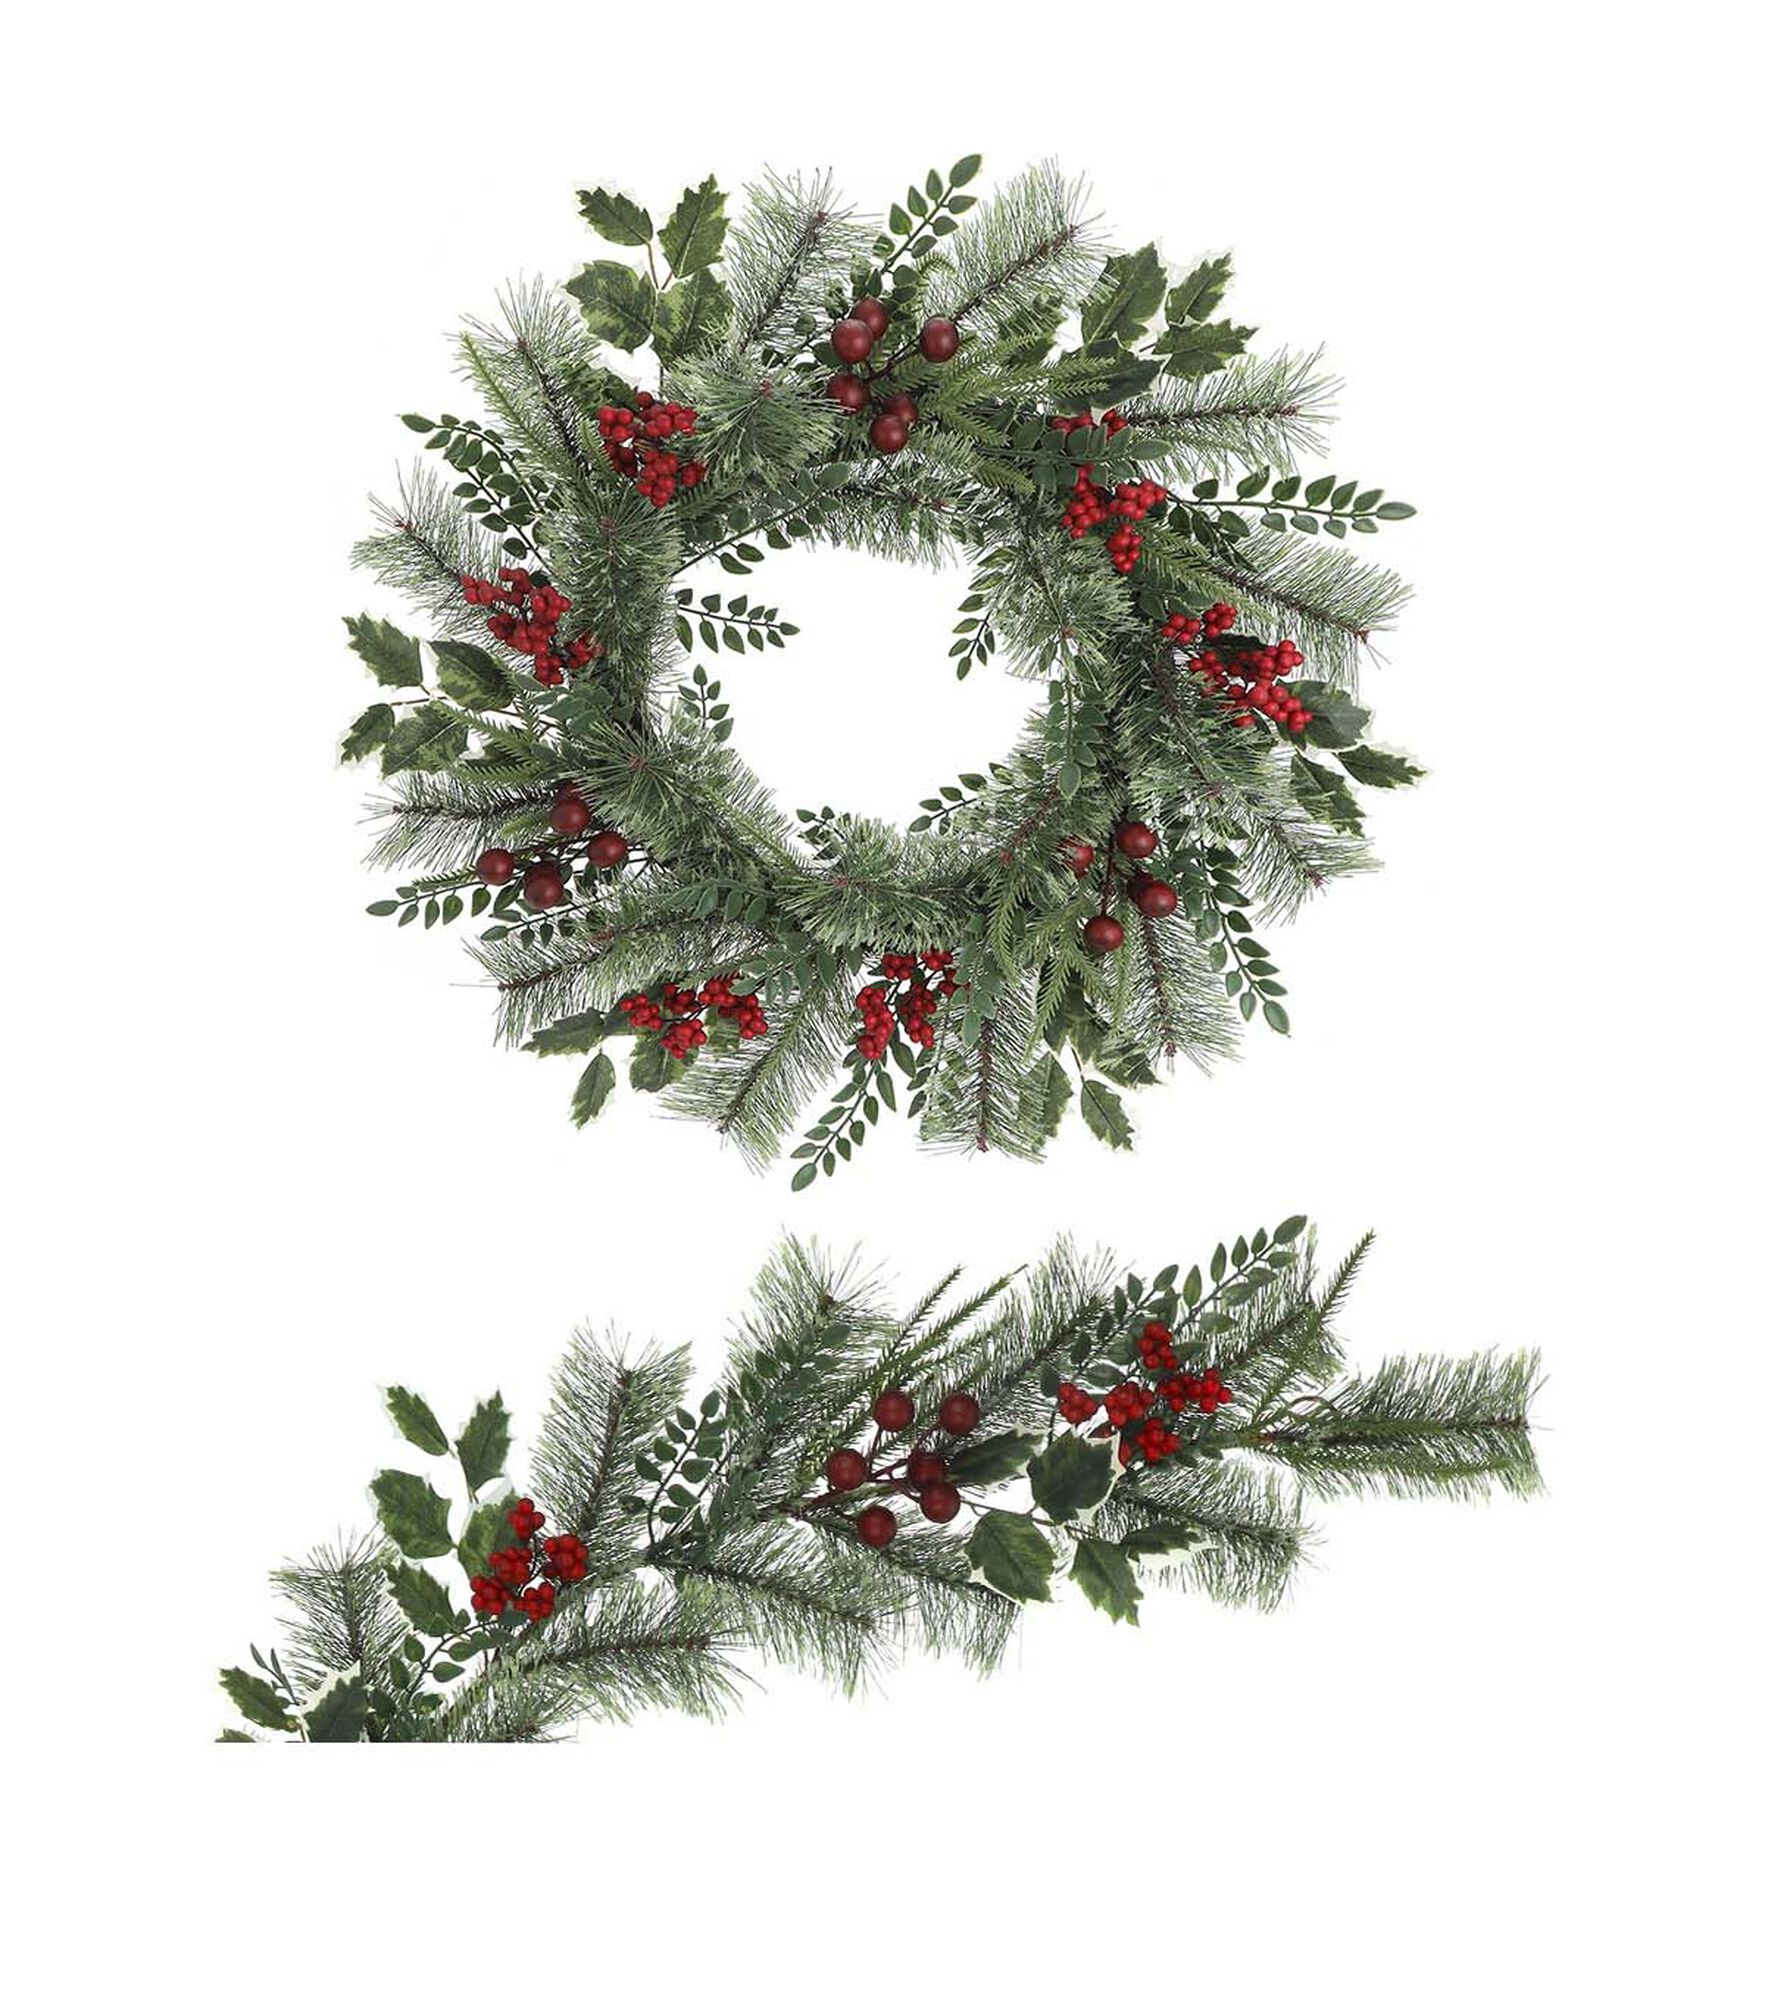 Garland from Branches of Holly with Red Berries. Christmas Decor Stock  Illustration - Illustration of black, ornament: 132289761